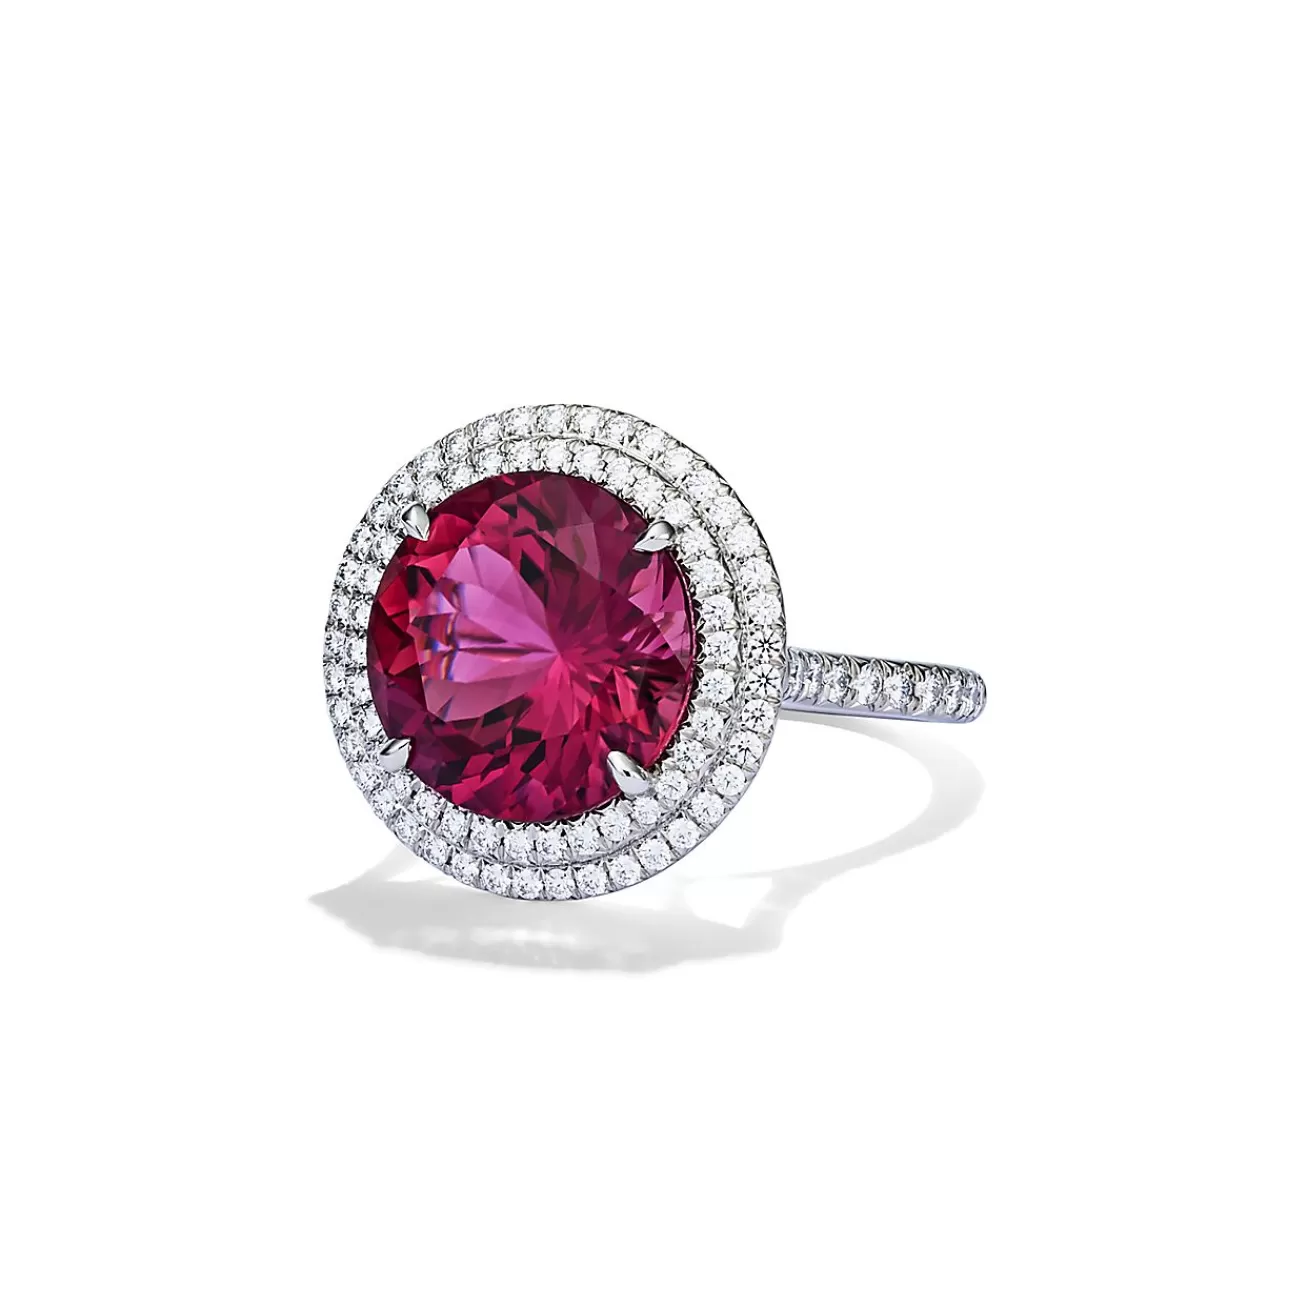 Tiffany & Co. Ring in Platinum with a Pink Tourmaline and Diamonds | ^ Rings | Diamond Jewelry